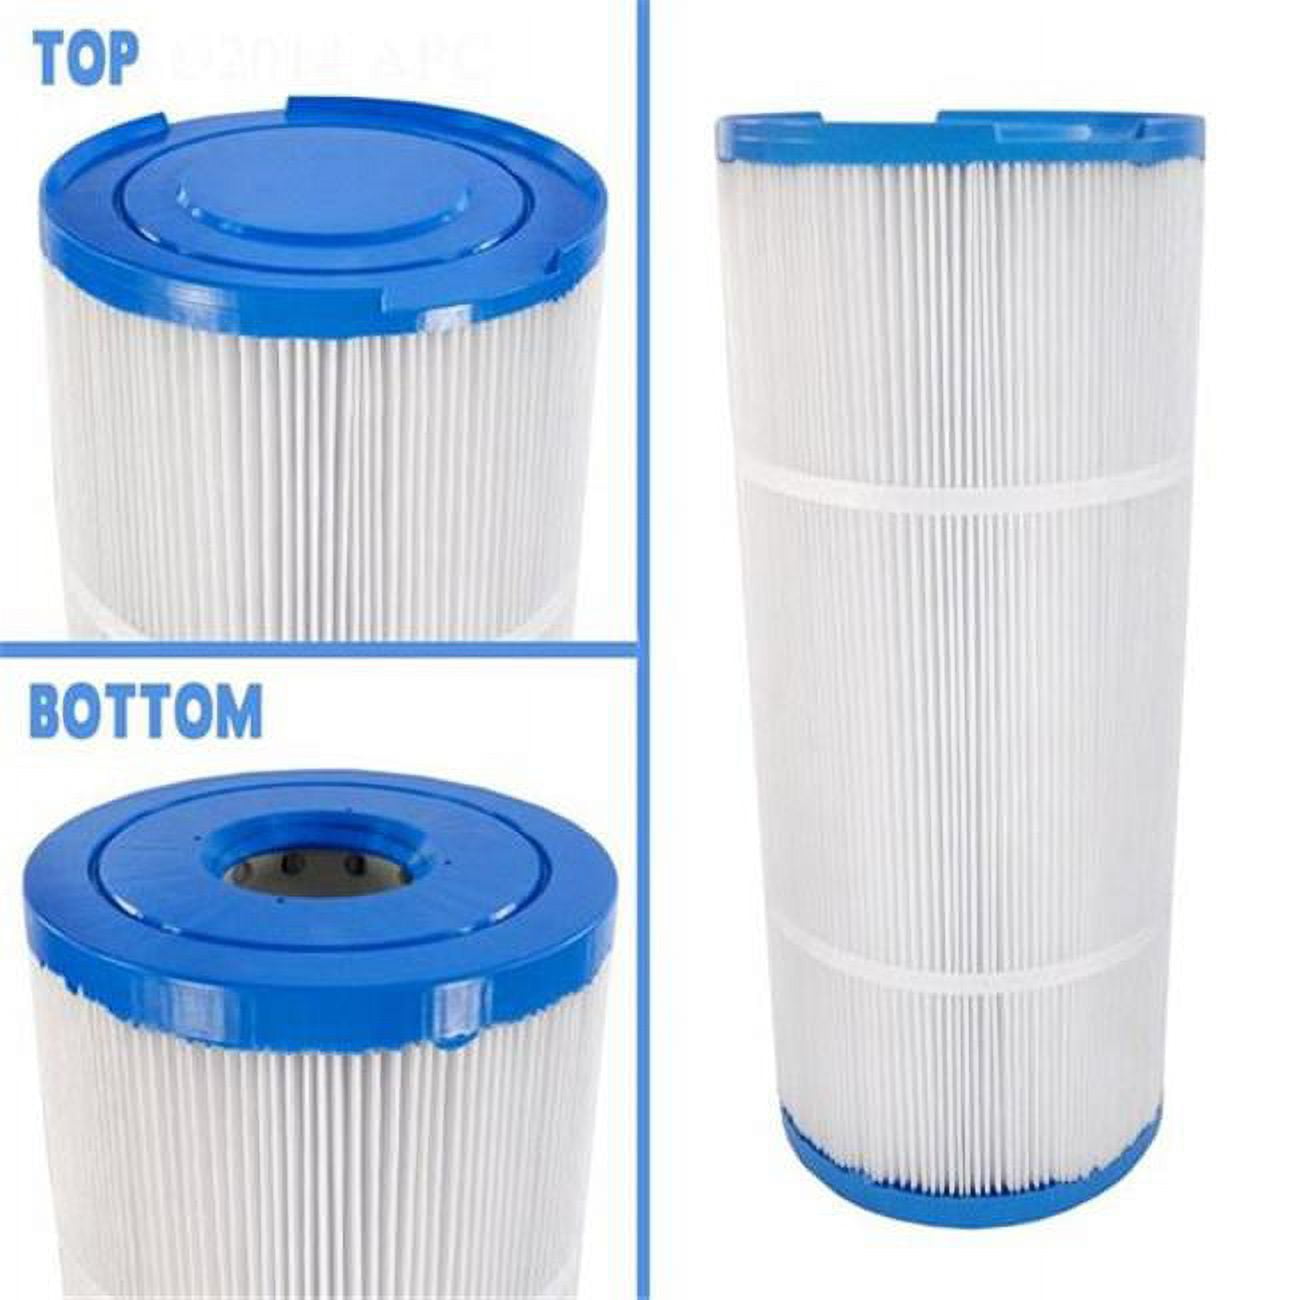 APCC7433 7.5 x 18 in. with Castle Top Style Pool & Spa Replacement Filter Cartridge, 75 sq ft -  Filbur